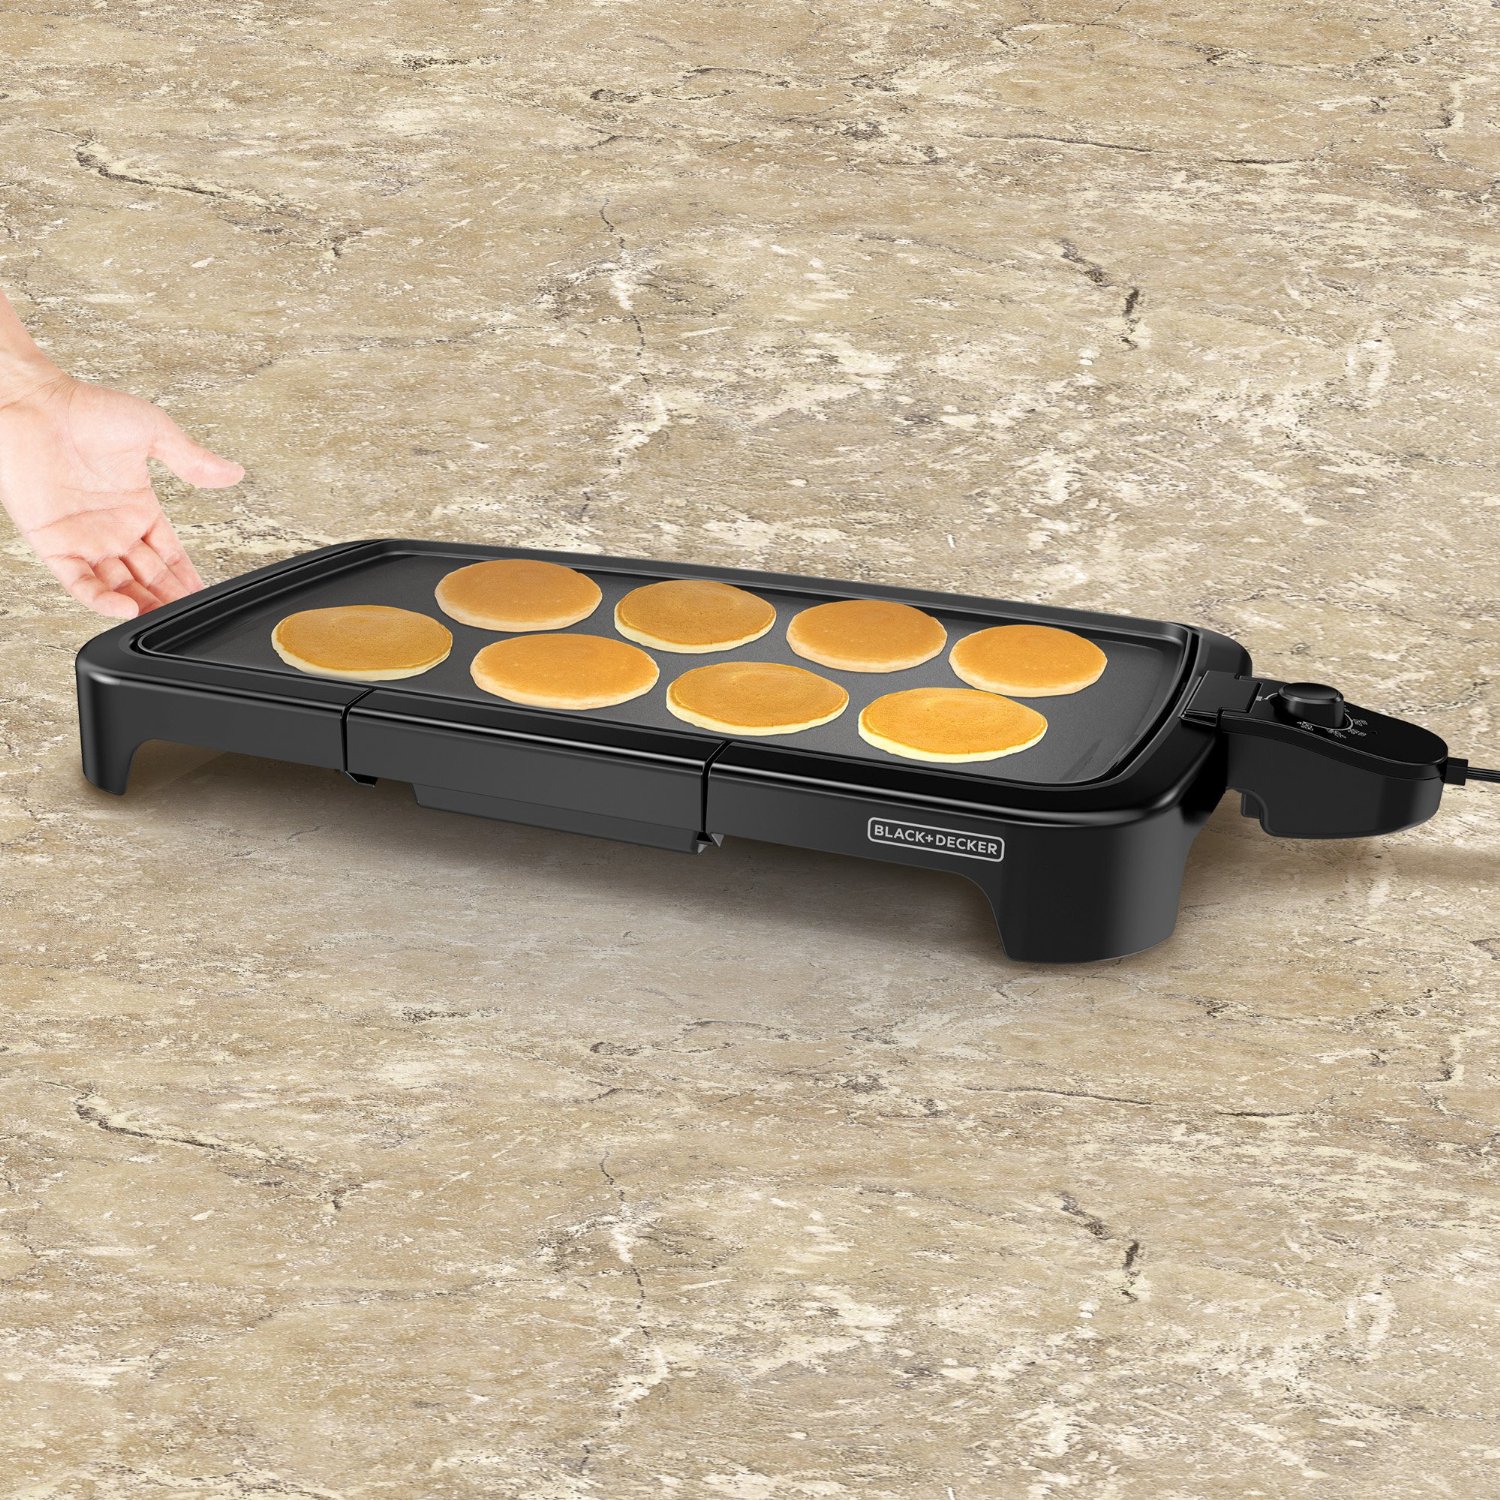 Black & Decker family-sized electric griddle for $14